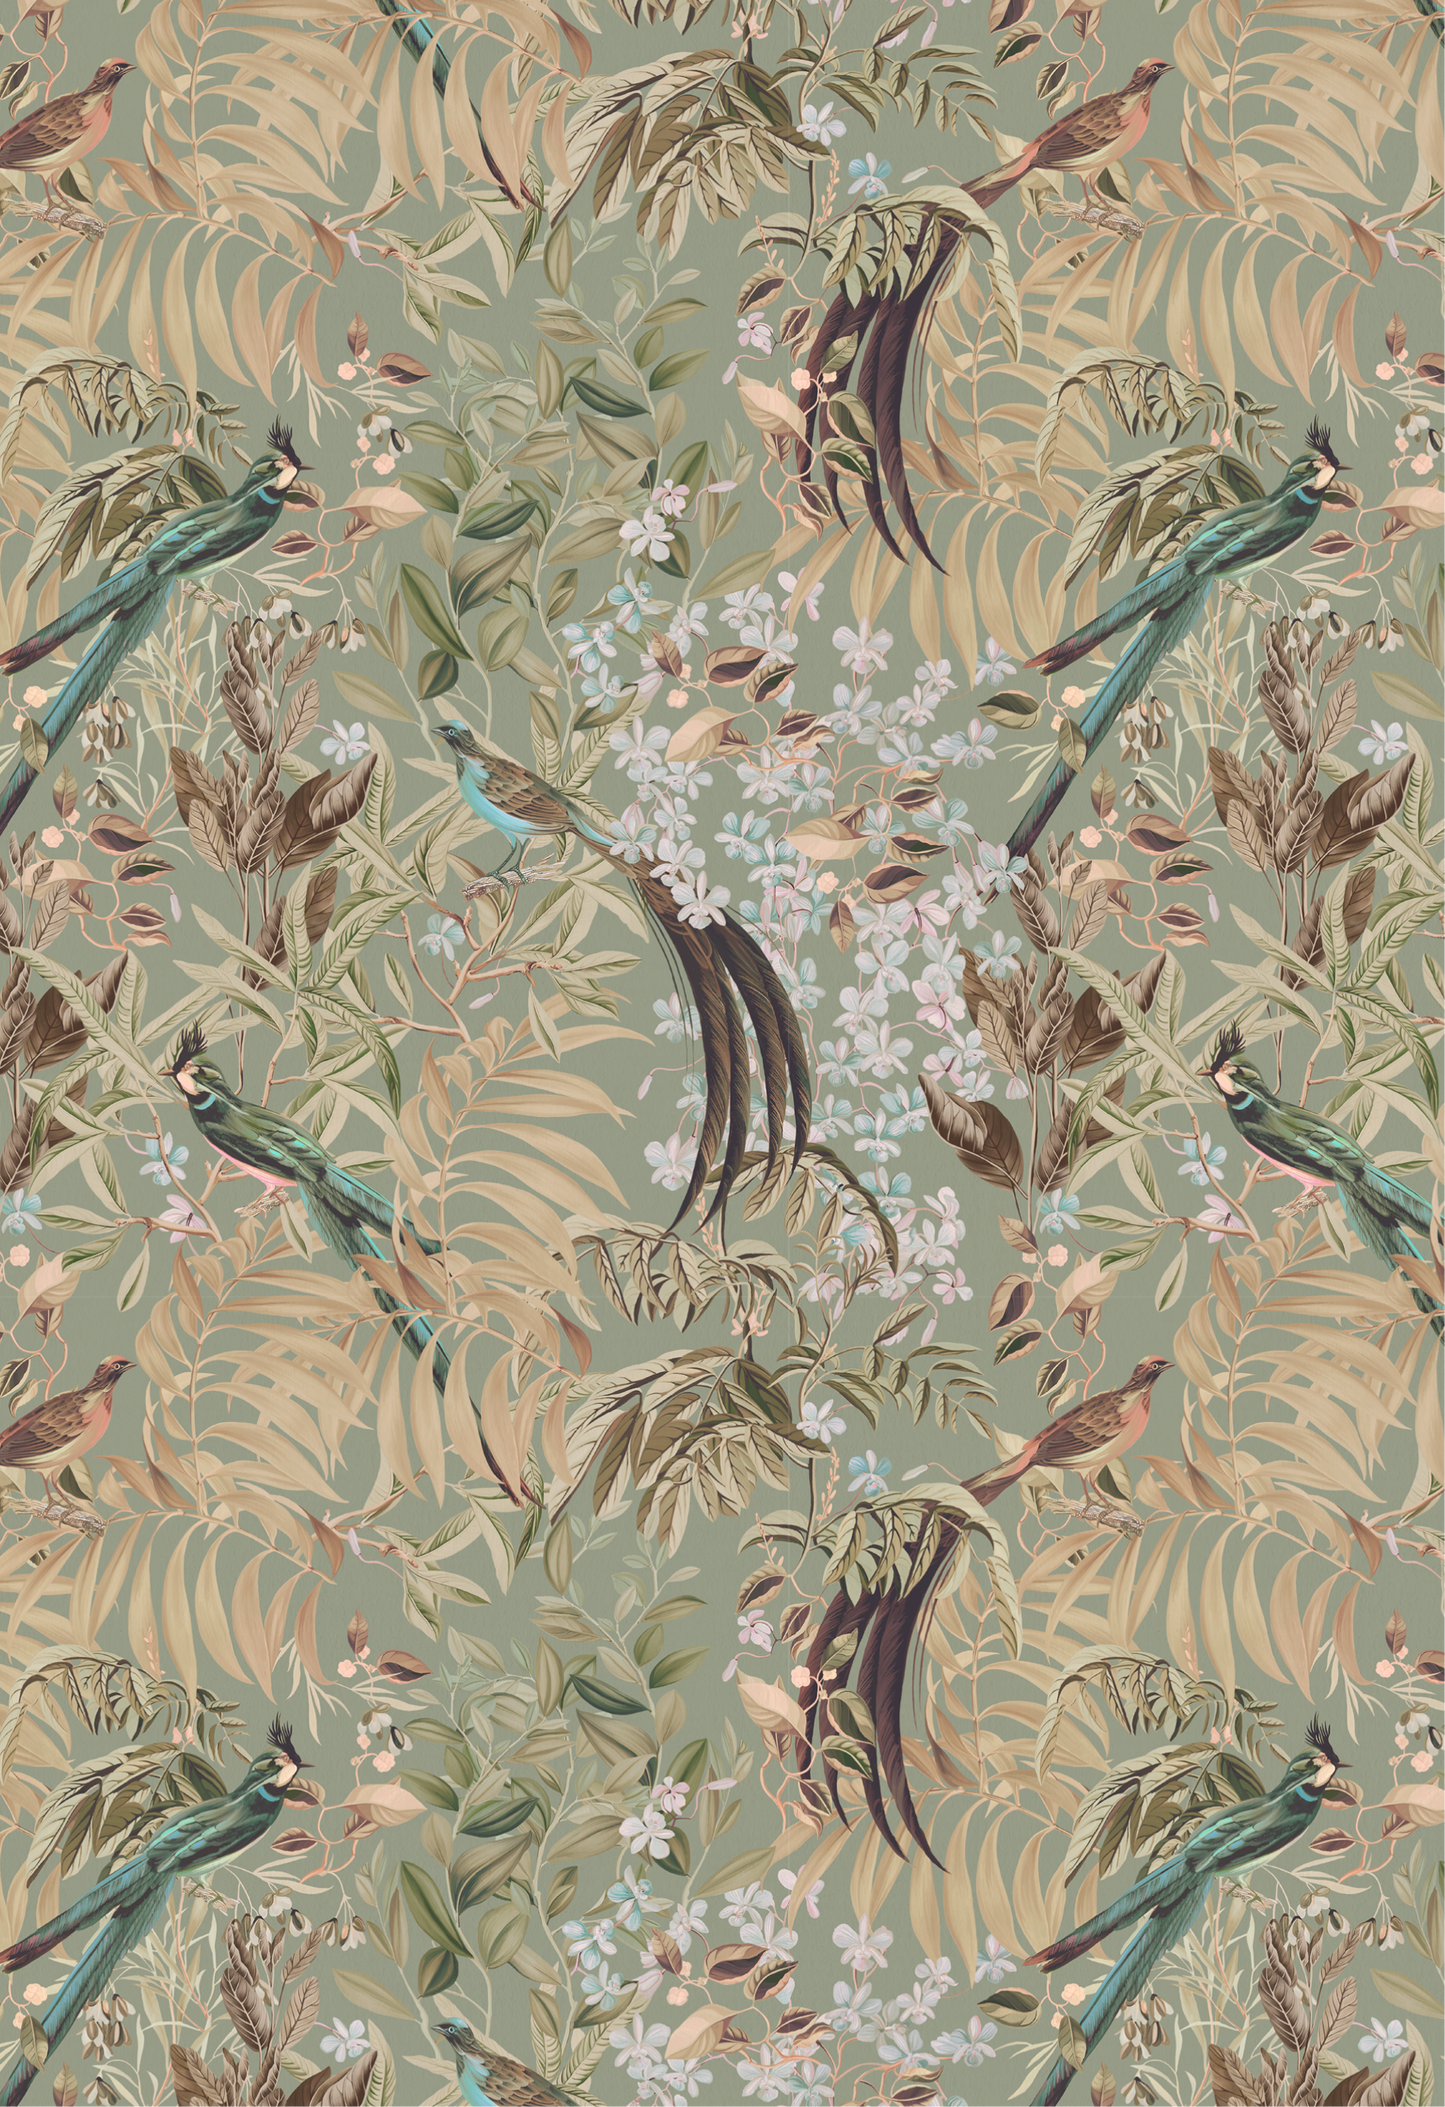 Botanical painted birds with orchids and leafy palms on light green background by Deus ex Gardenia of Resplendent Woods Wallpaper in Willow. 